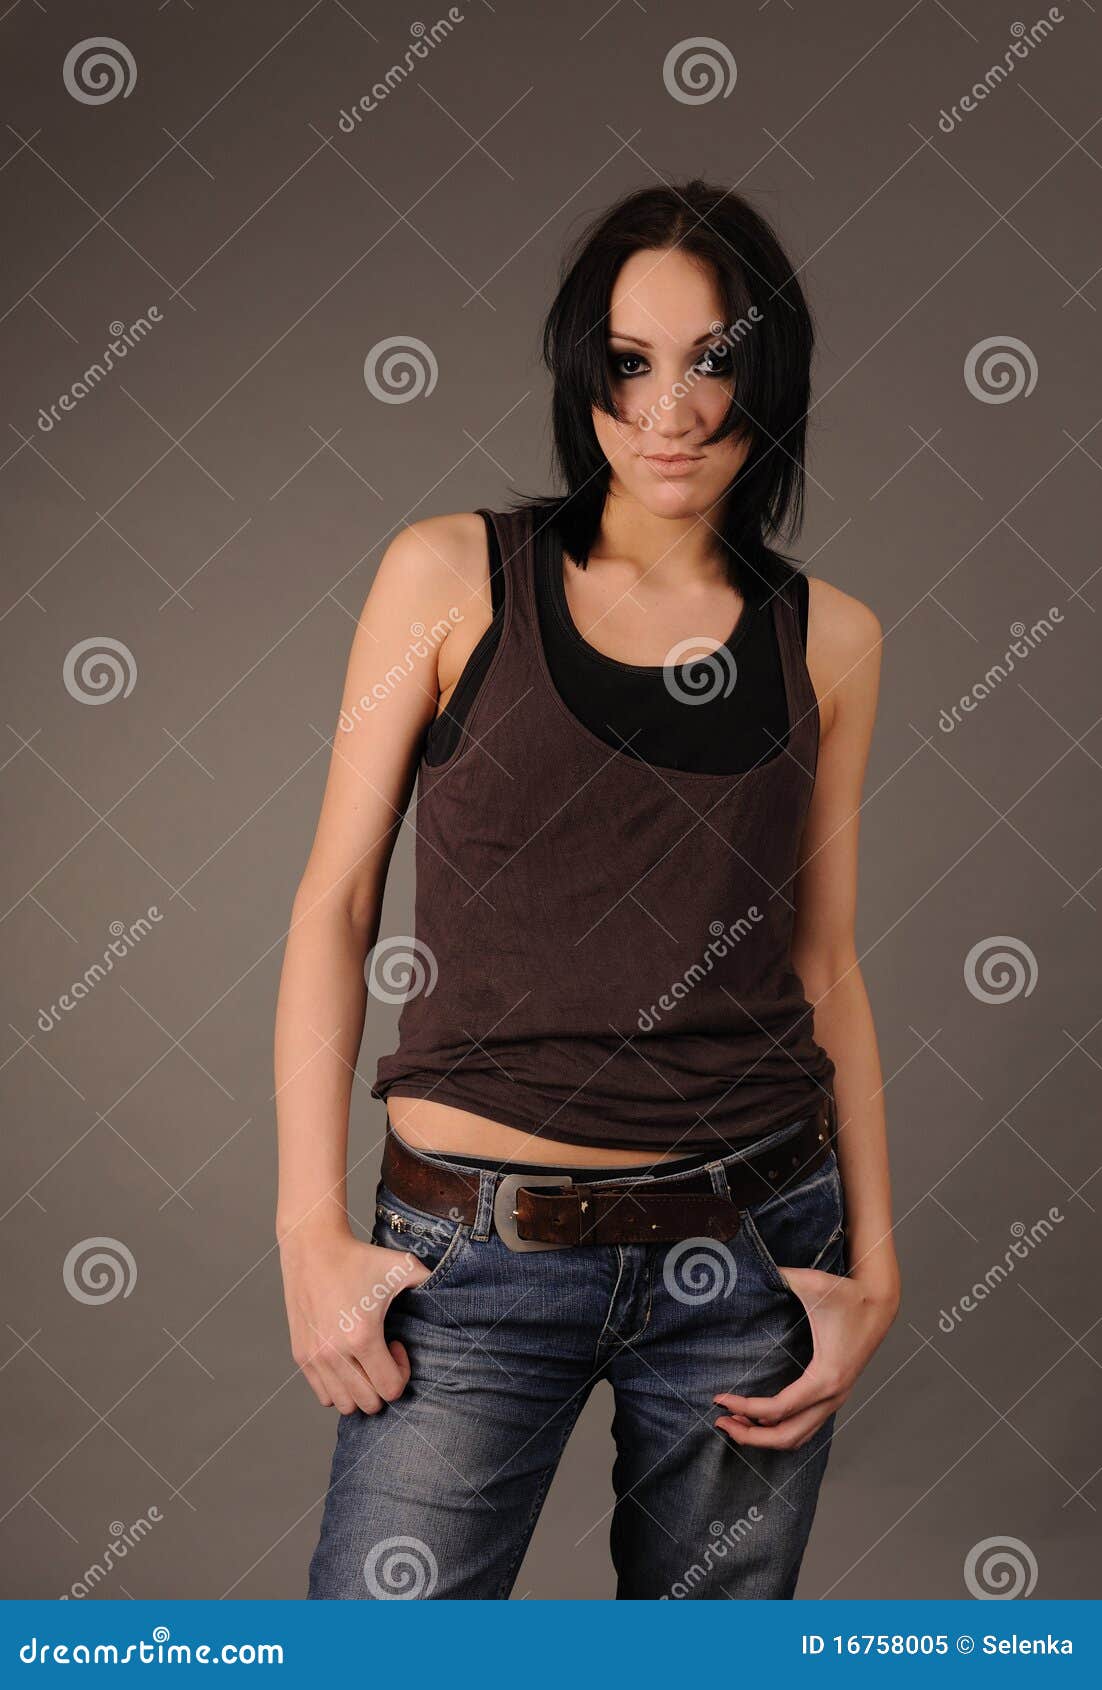 girl in rumpled shirt and jeans.